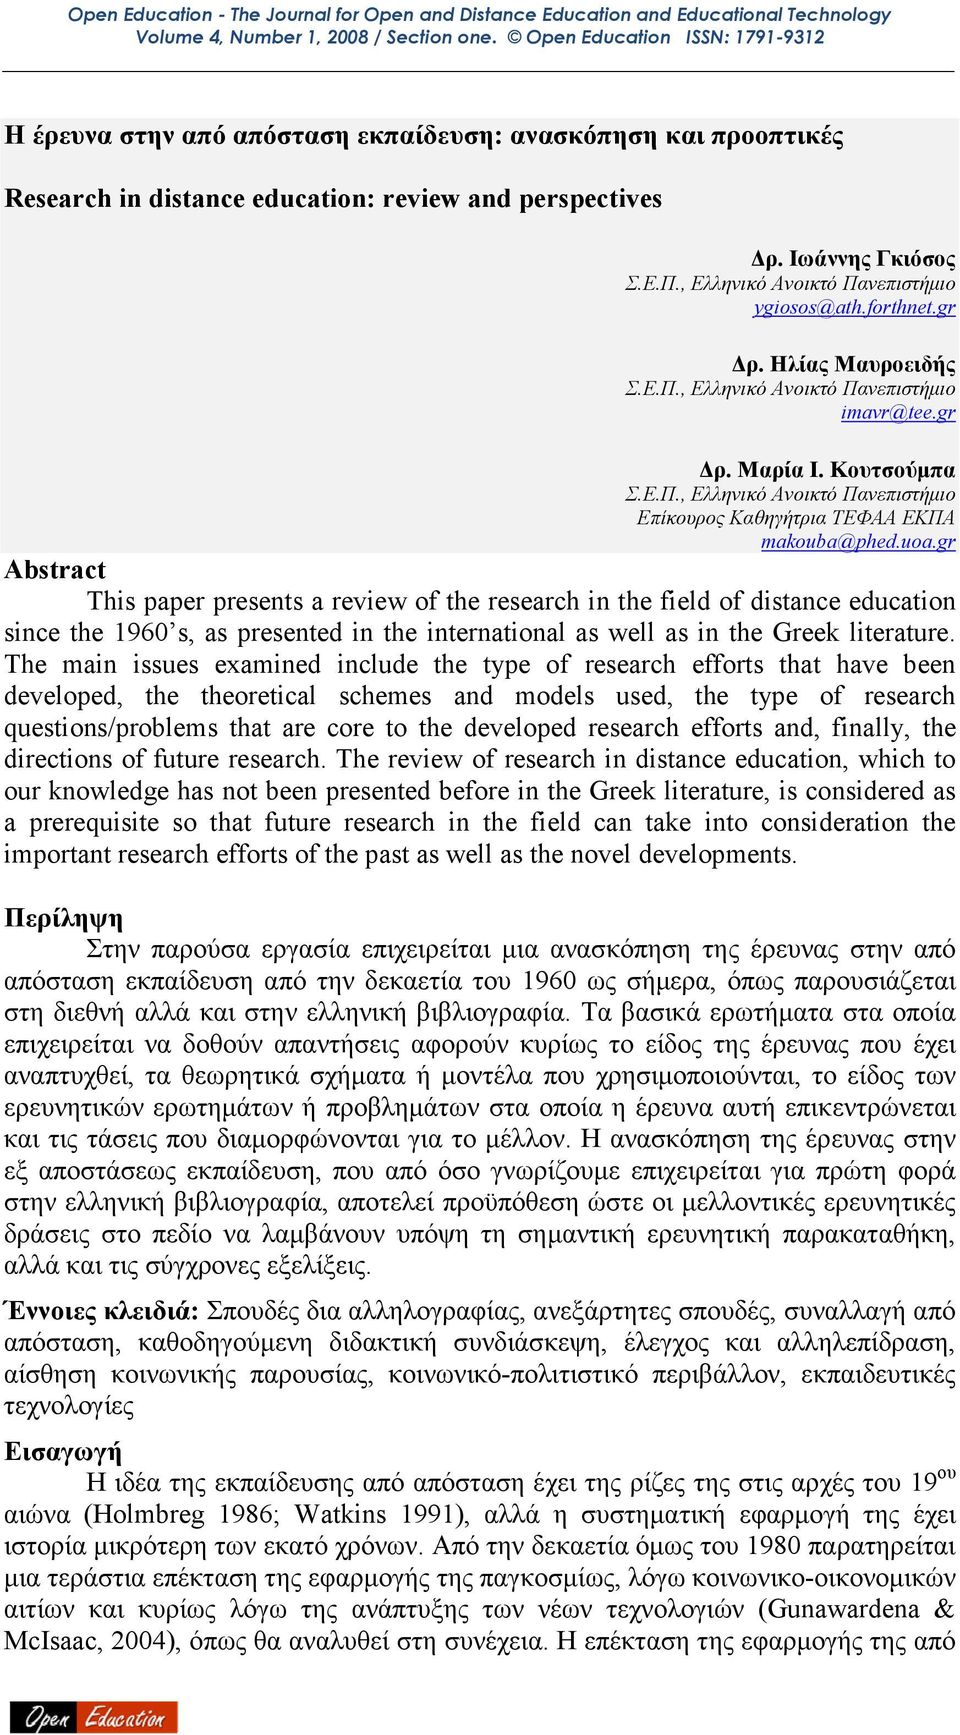 gr Abstract This paper presents a review of the research in the field of distance education since the 1960 s, as presented in the international as well as in the Greek literature.